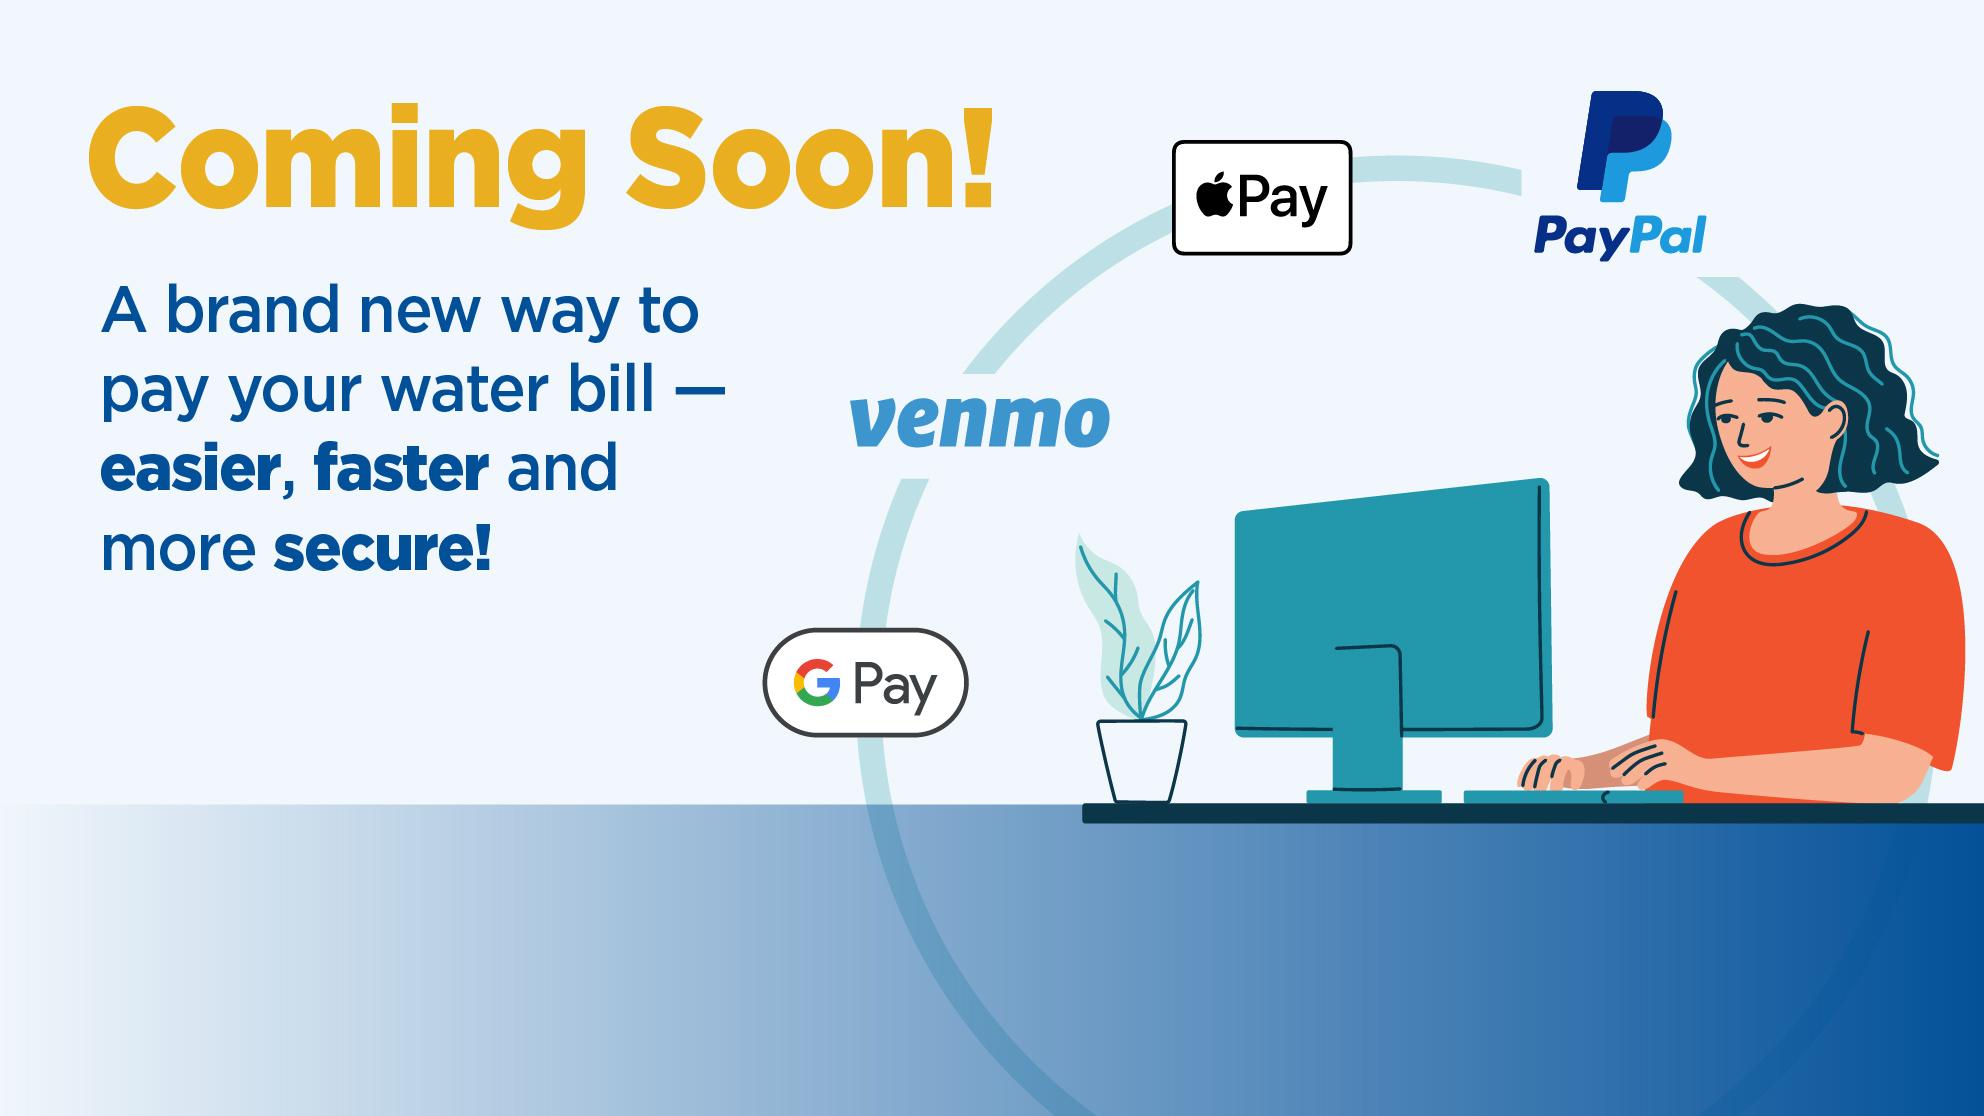 Coming Soon! A brand new way to pay your water bill -- easier, faster, and more secure!